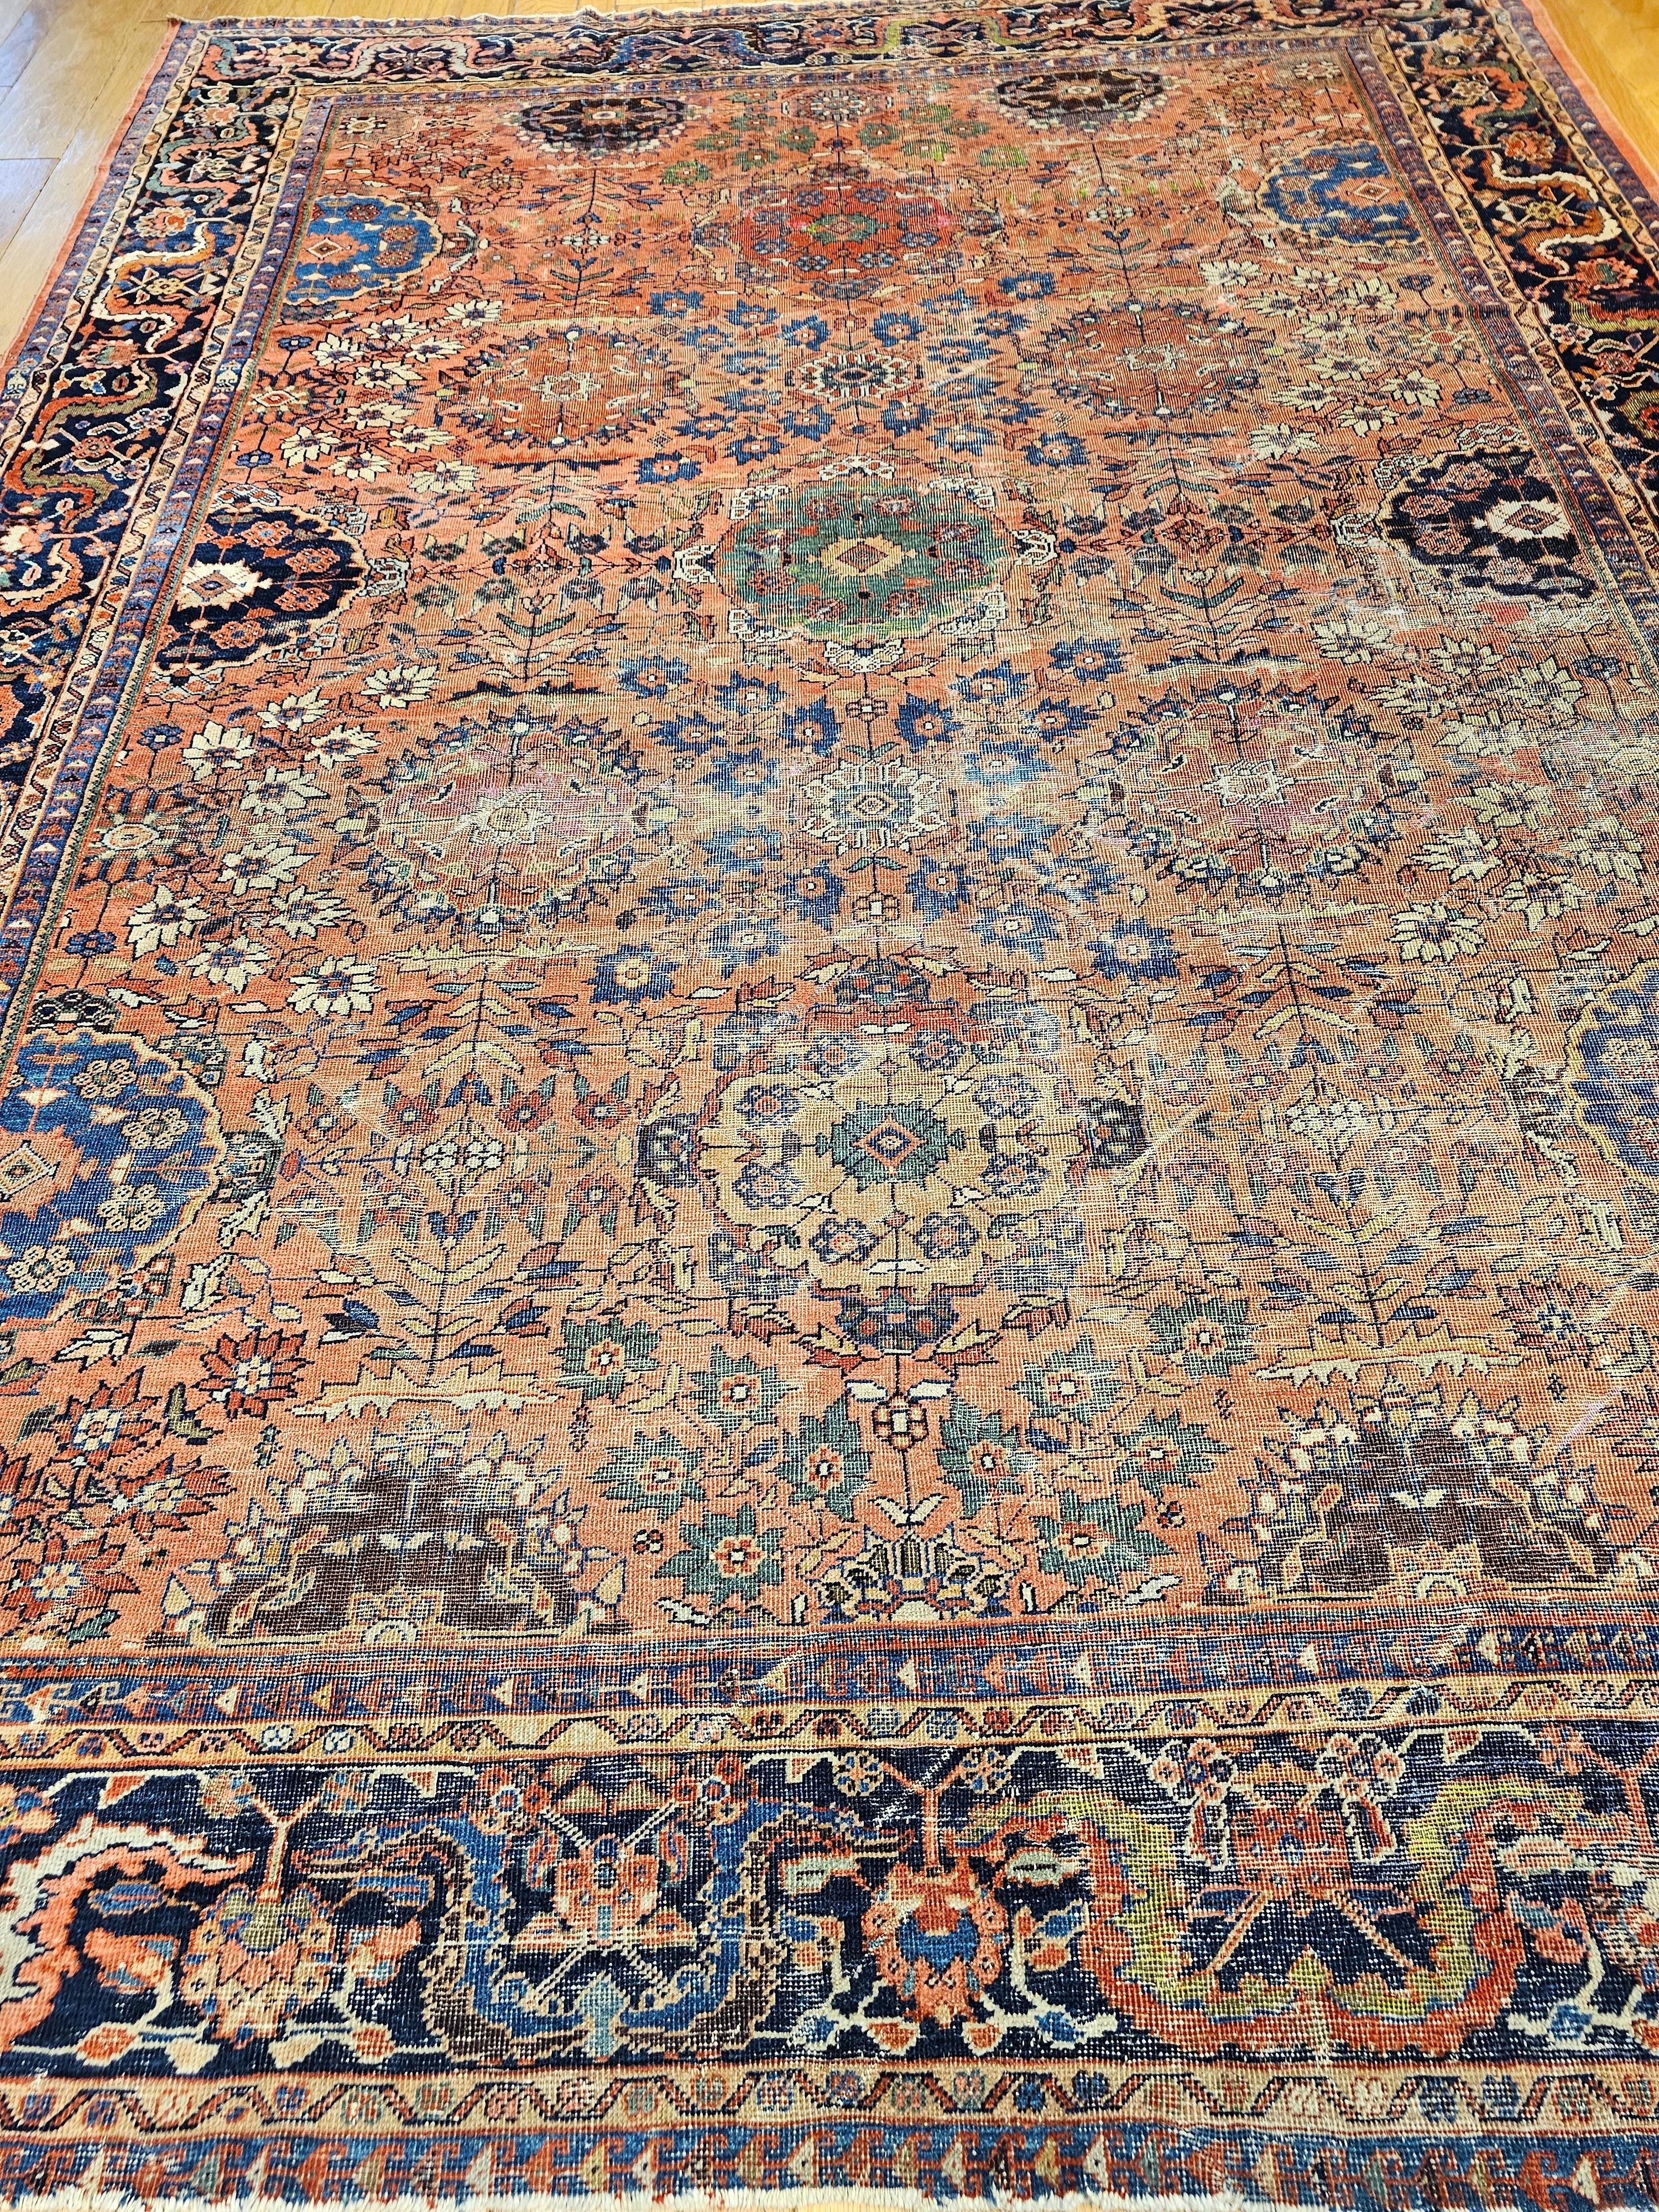 Vintage Persian Mahal Sultanabad Room Size Rug in Brick Red, Navy Blue 10